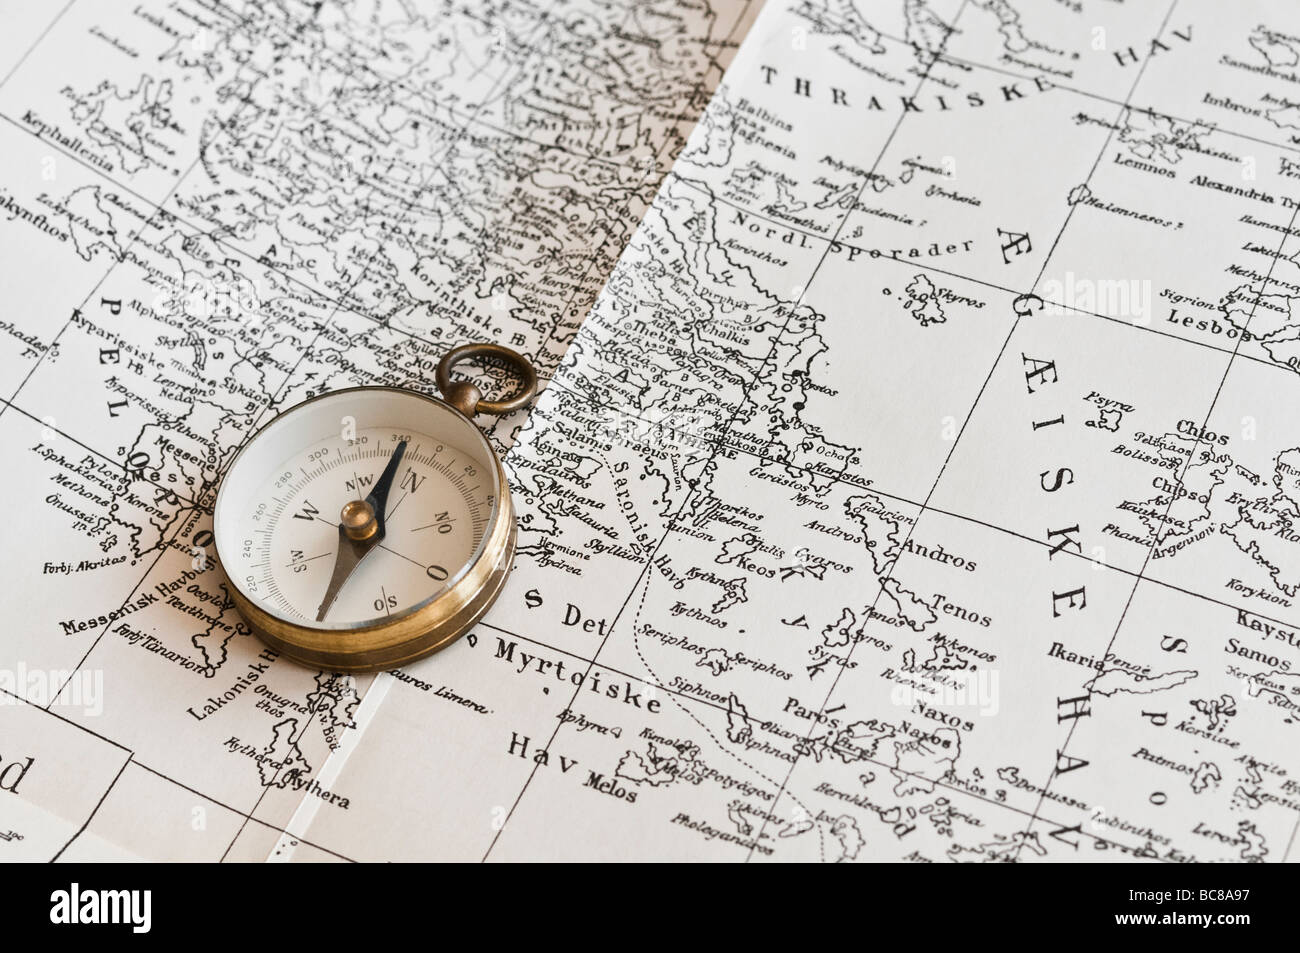 Closeup of old compass on old map of Greece. Stock Photo